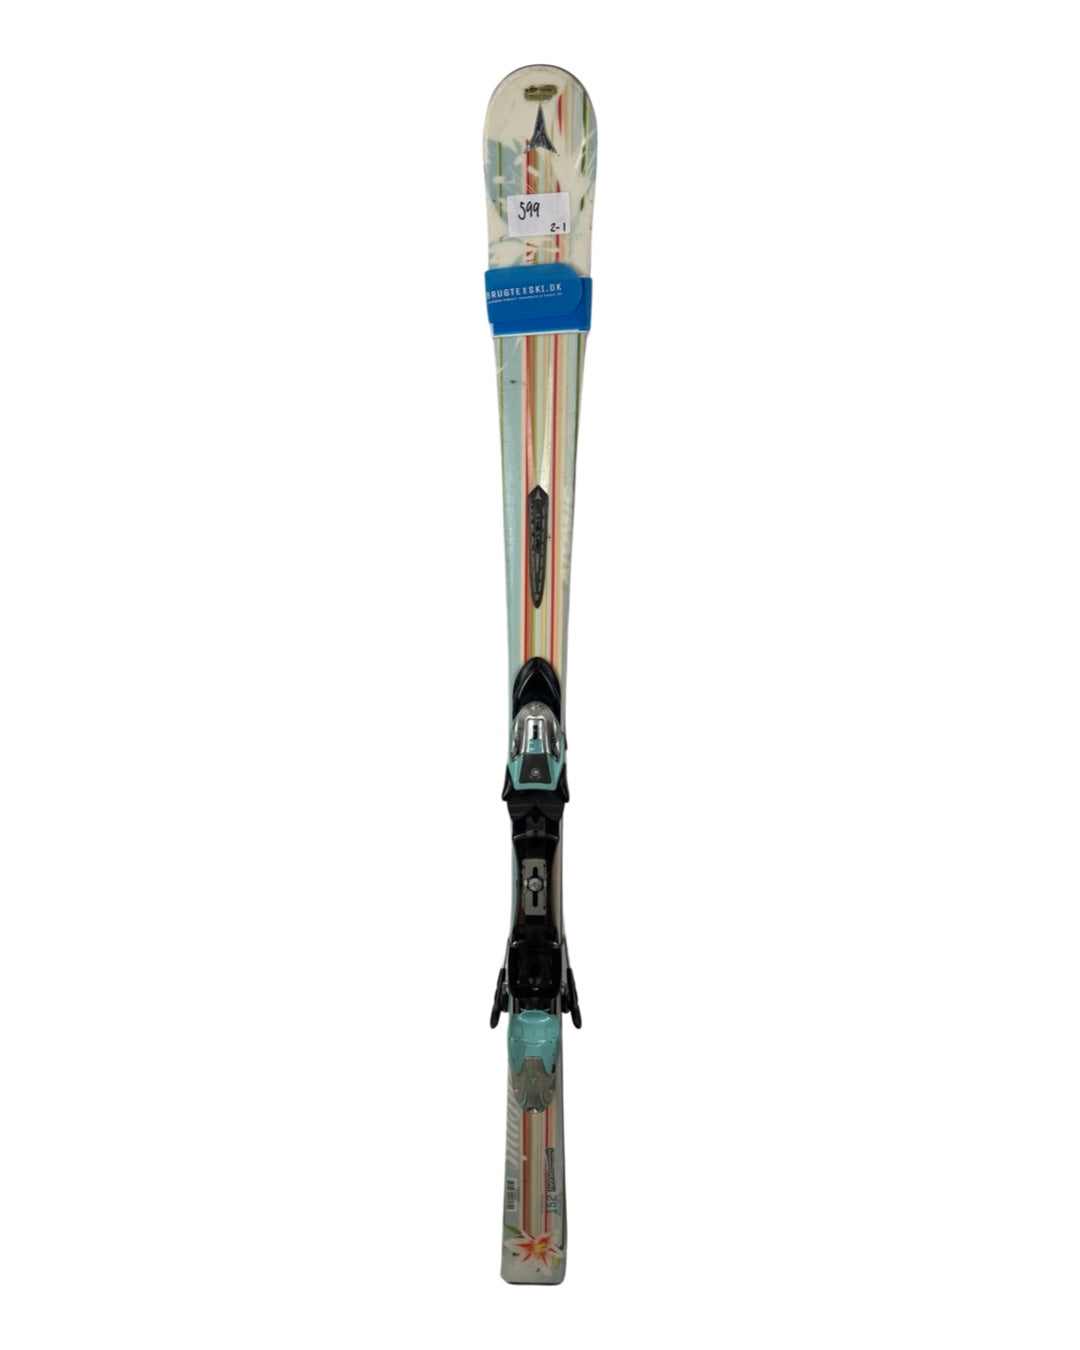 Adult skis - mixed 599 2